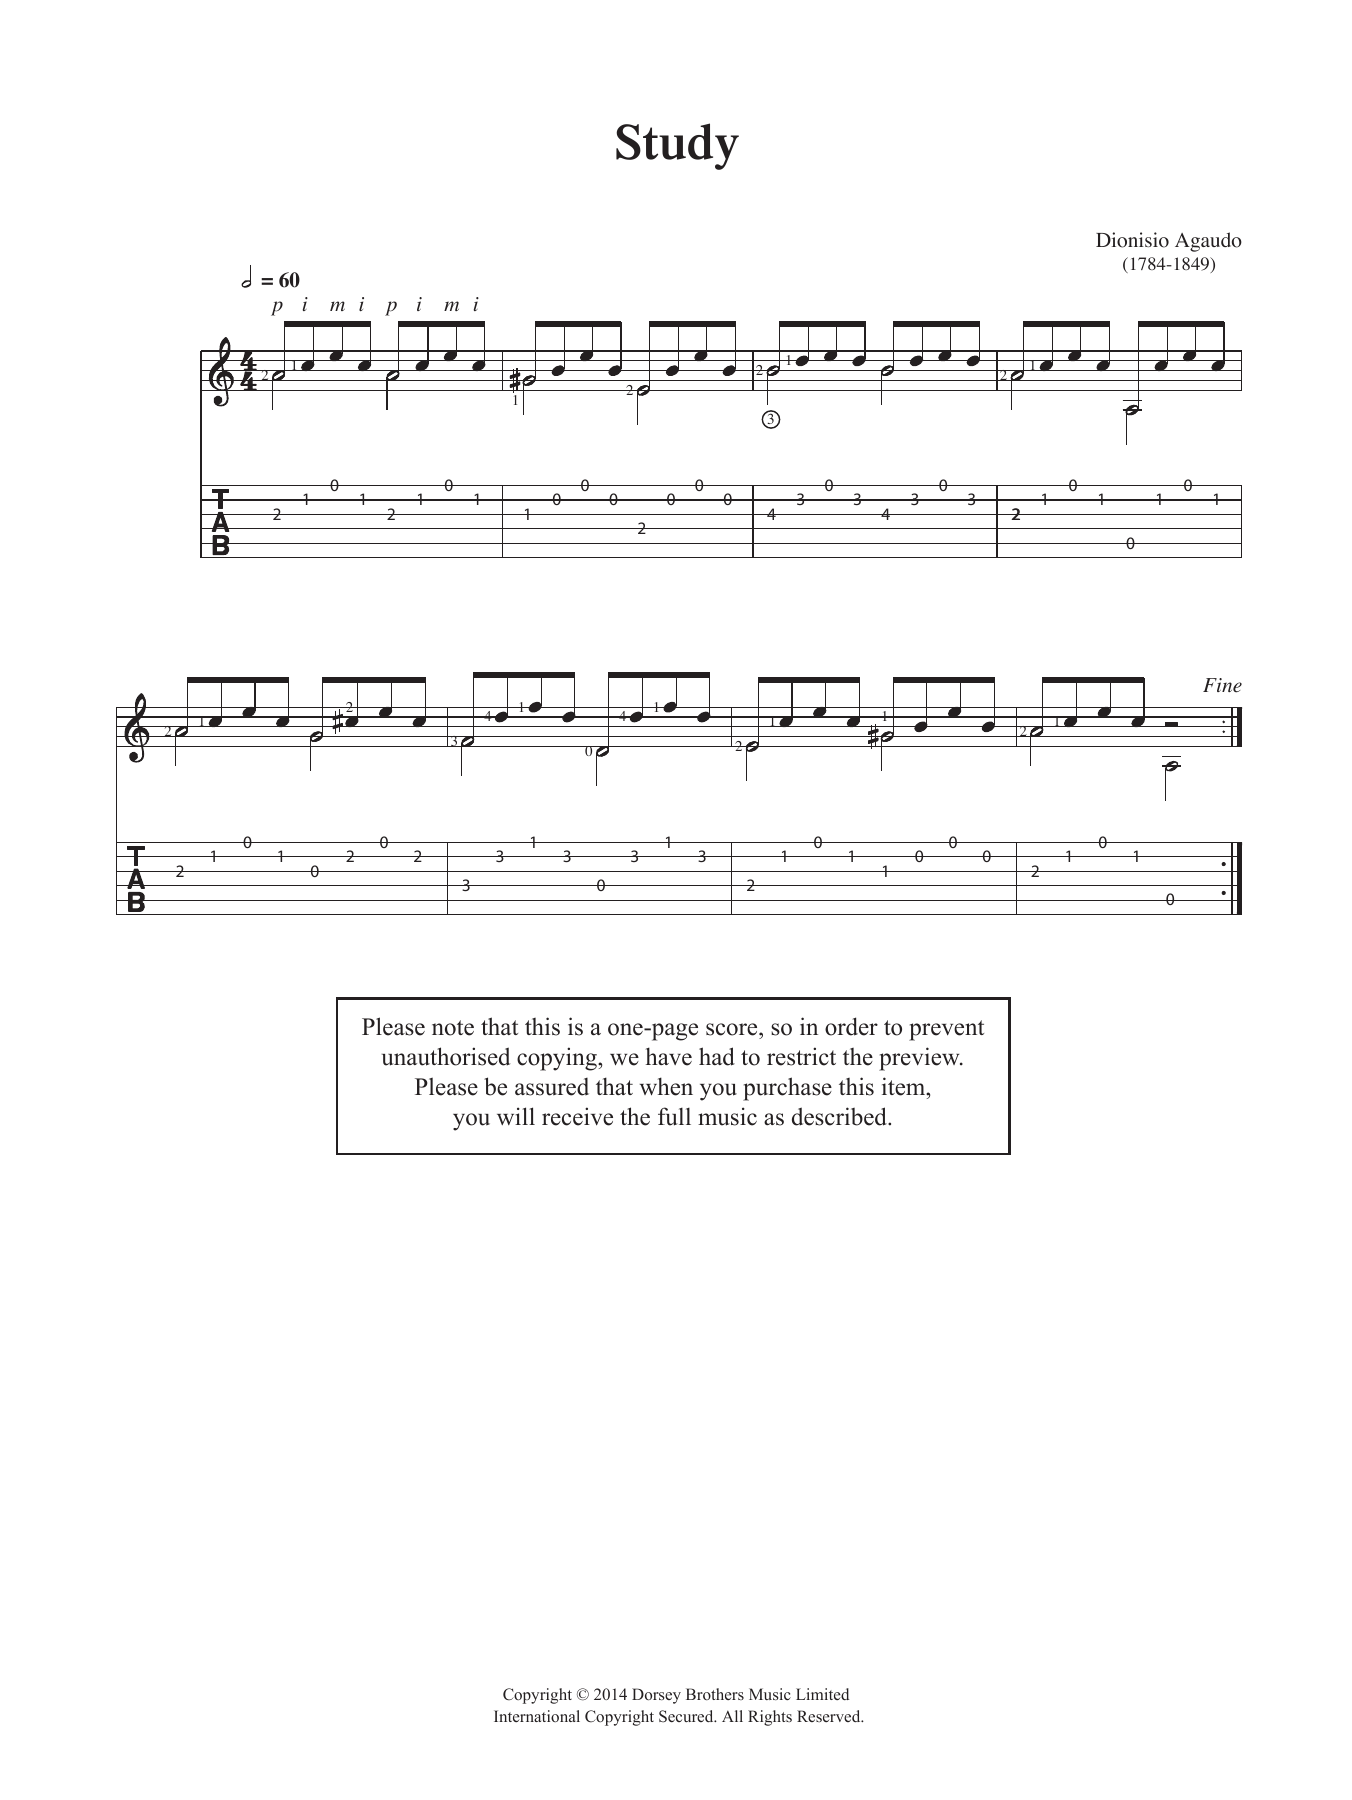 Dionisio Aguado Study sheet music preview music notes and score for Guitar including 2 page(s)